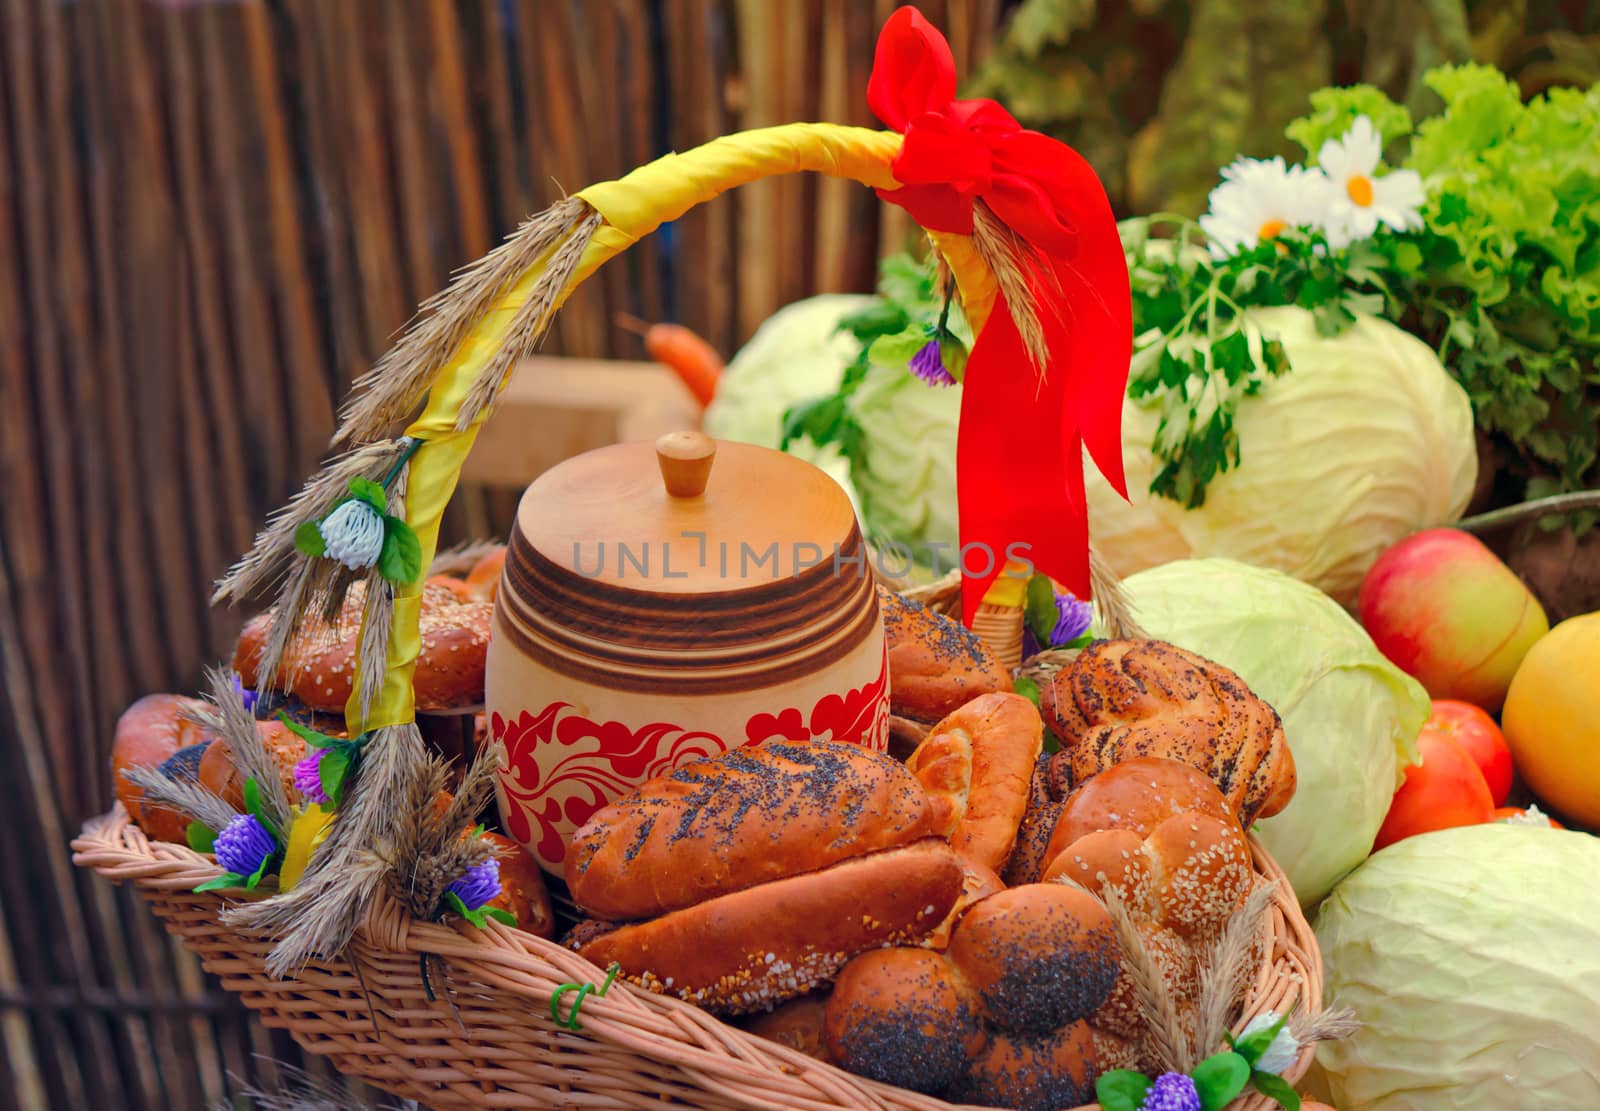 Beautifully decorated with ribbons, a basket with bread, is next with vegetables and fruit.
